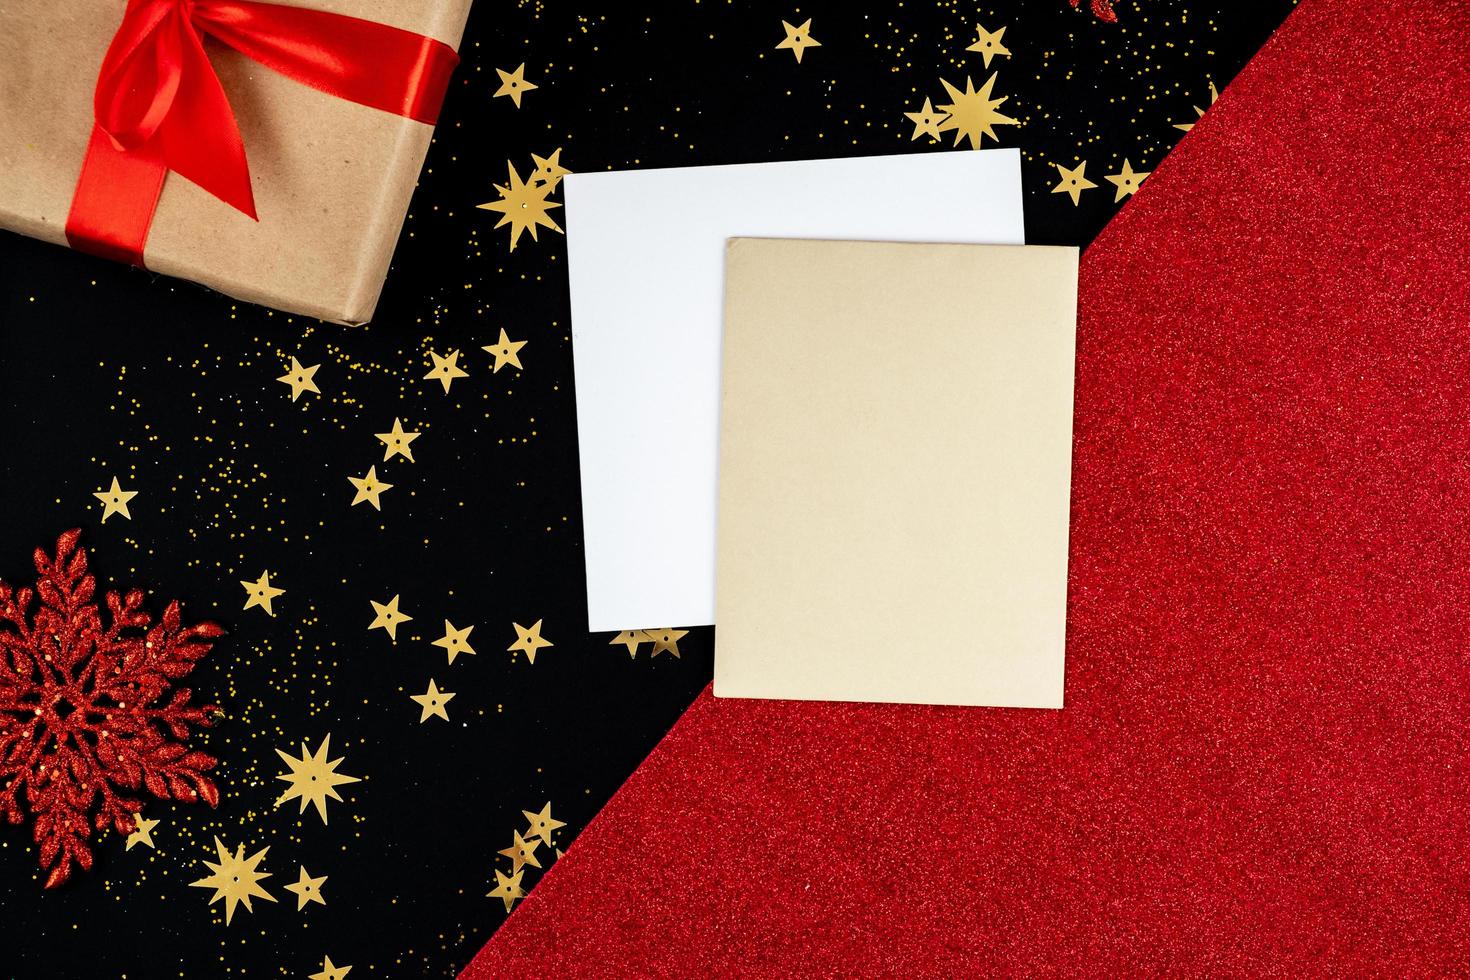 On a festive, red-black, New Year's background are greeting cards and a gift photo